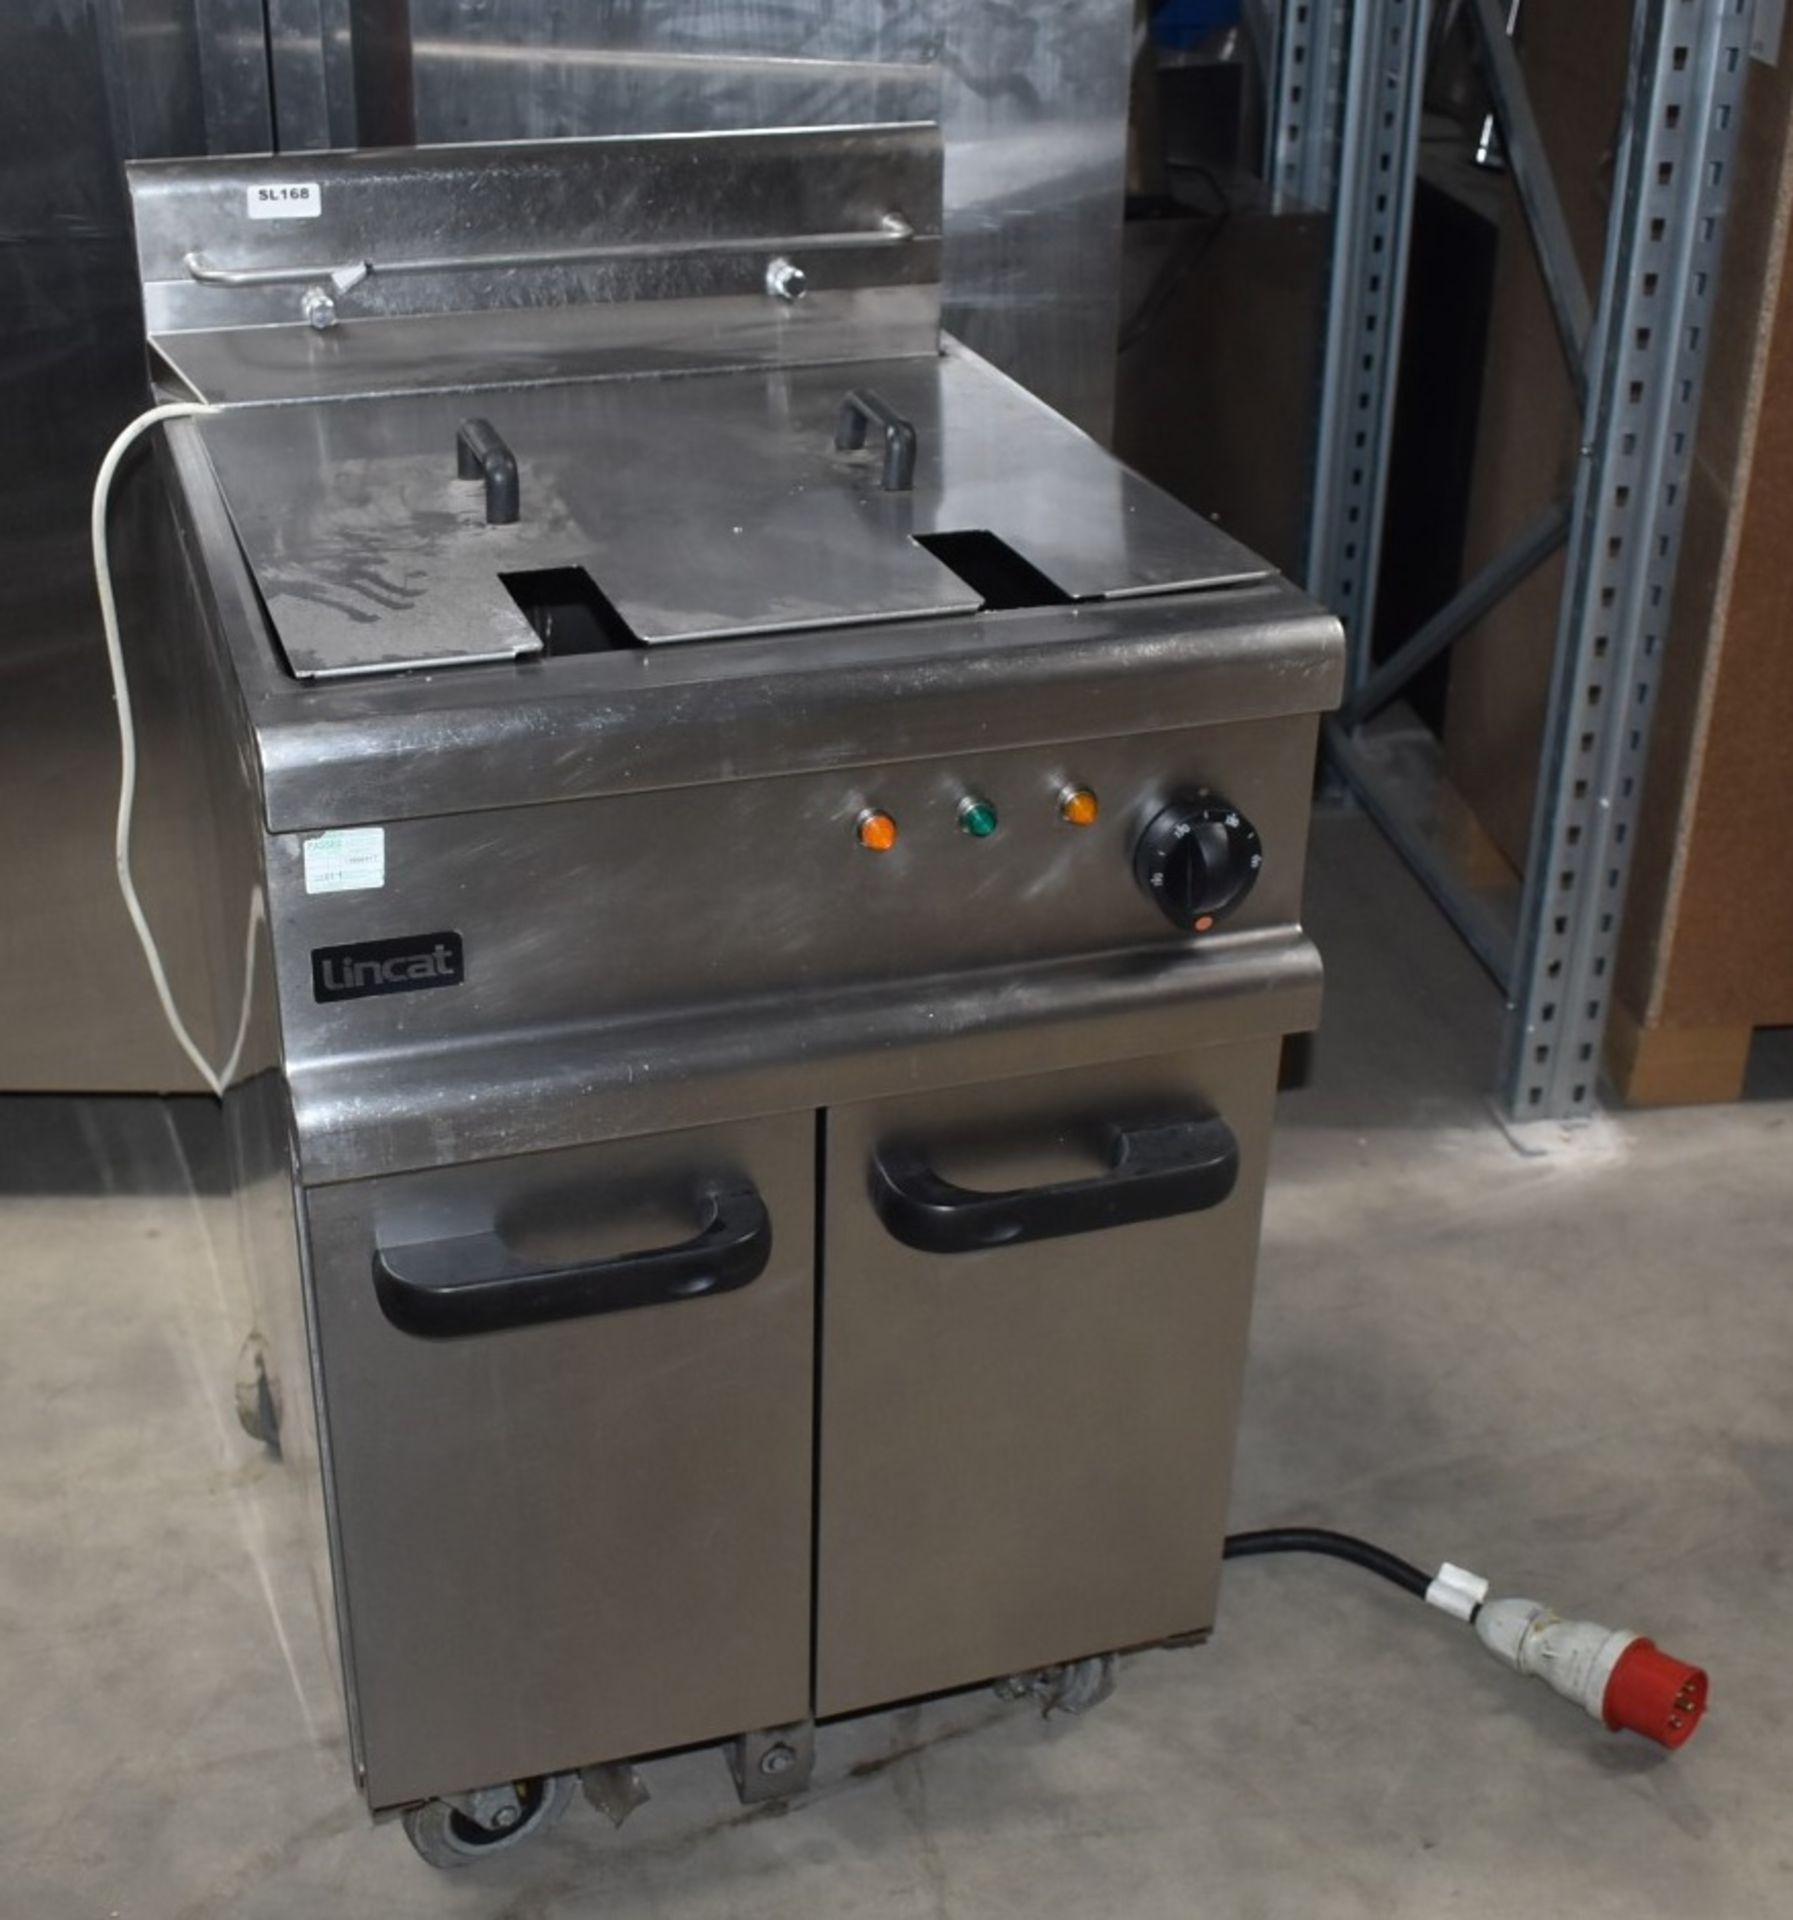 1 x Lincat Opus 700 Single Tank Electric Fryer With Built In Filtration - 3 Phase - Image 6 of 19